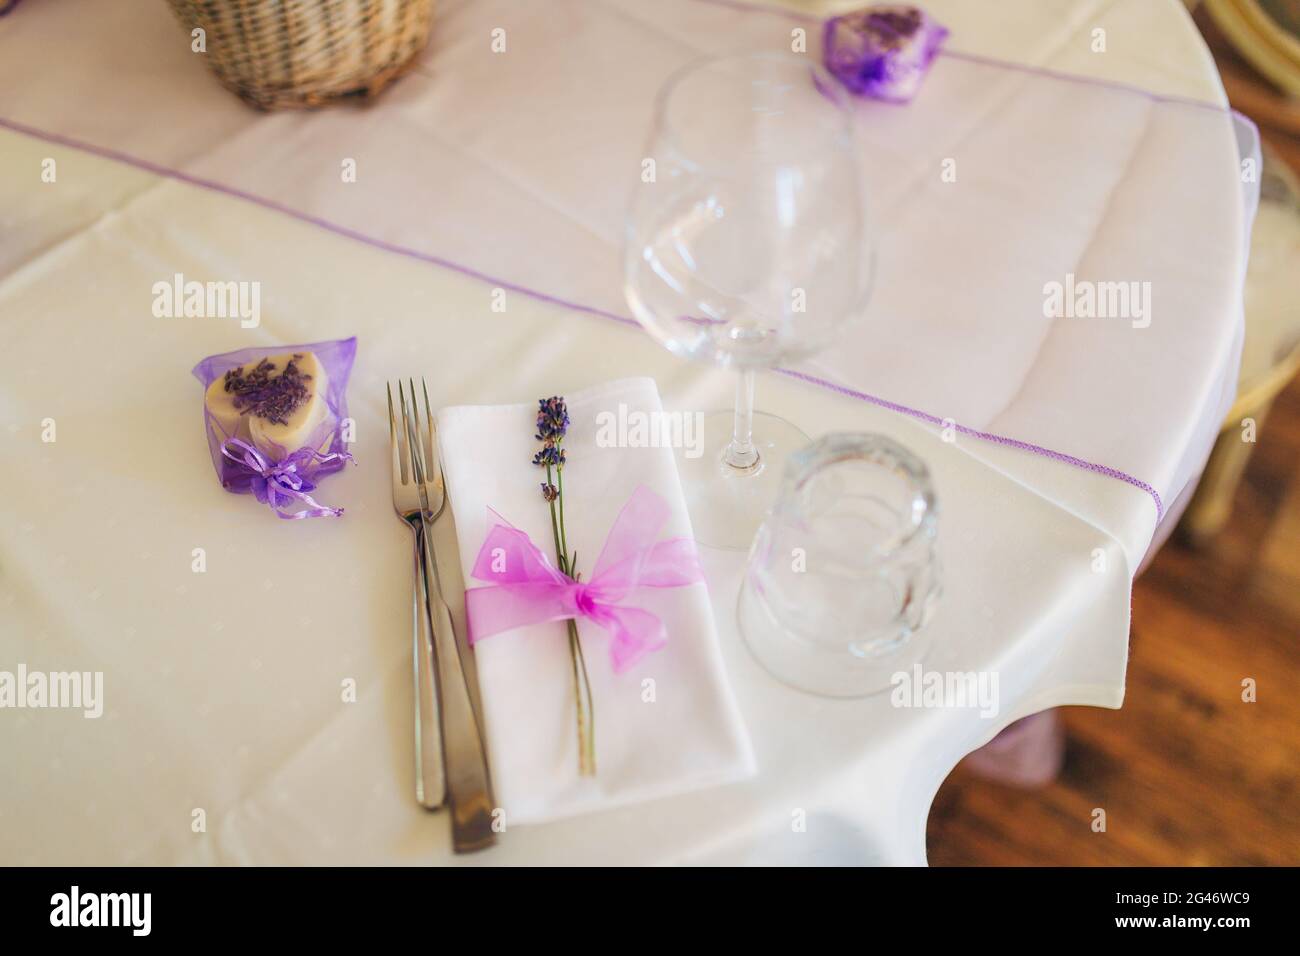 Wedding table setting at a banquet. Stock Photo